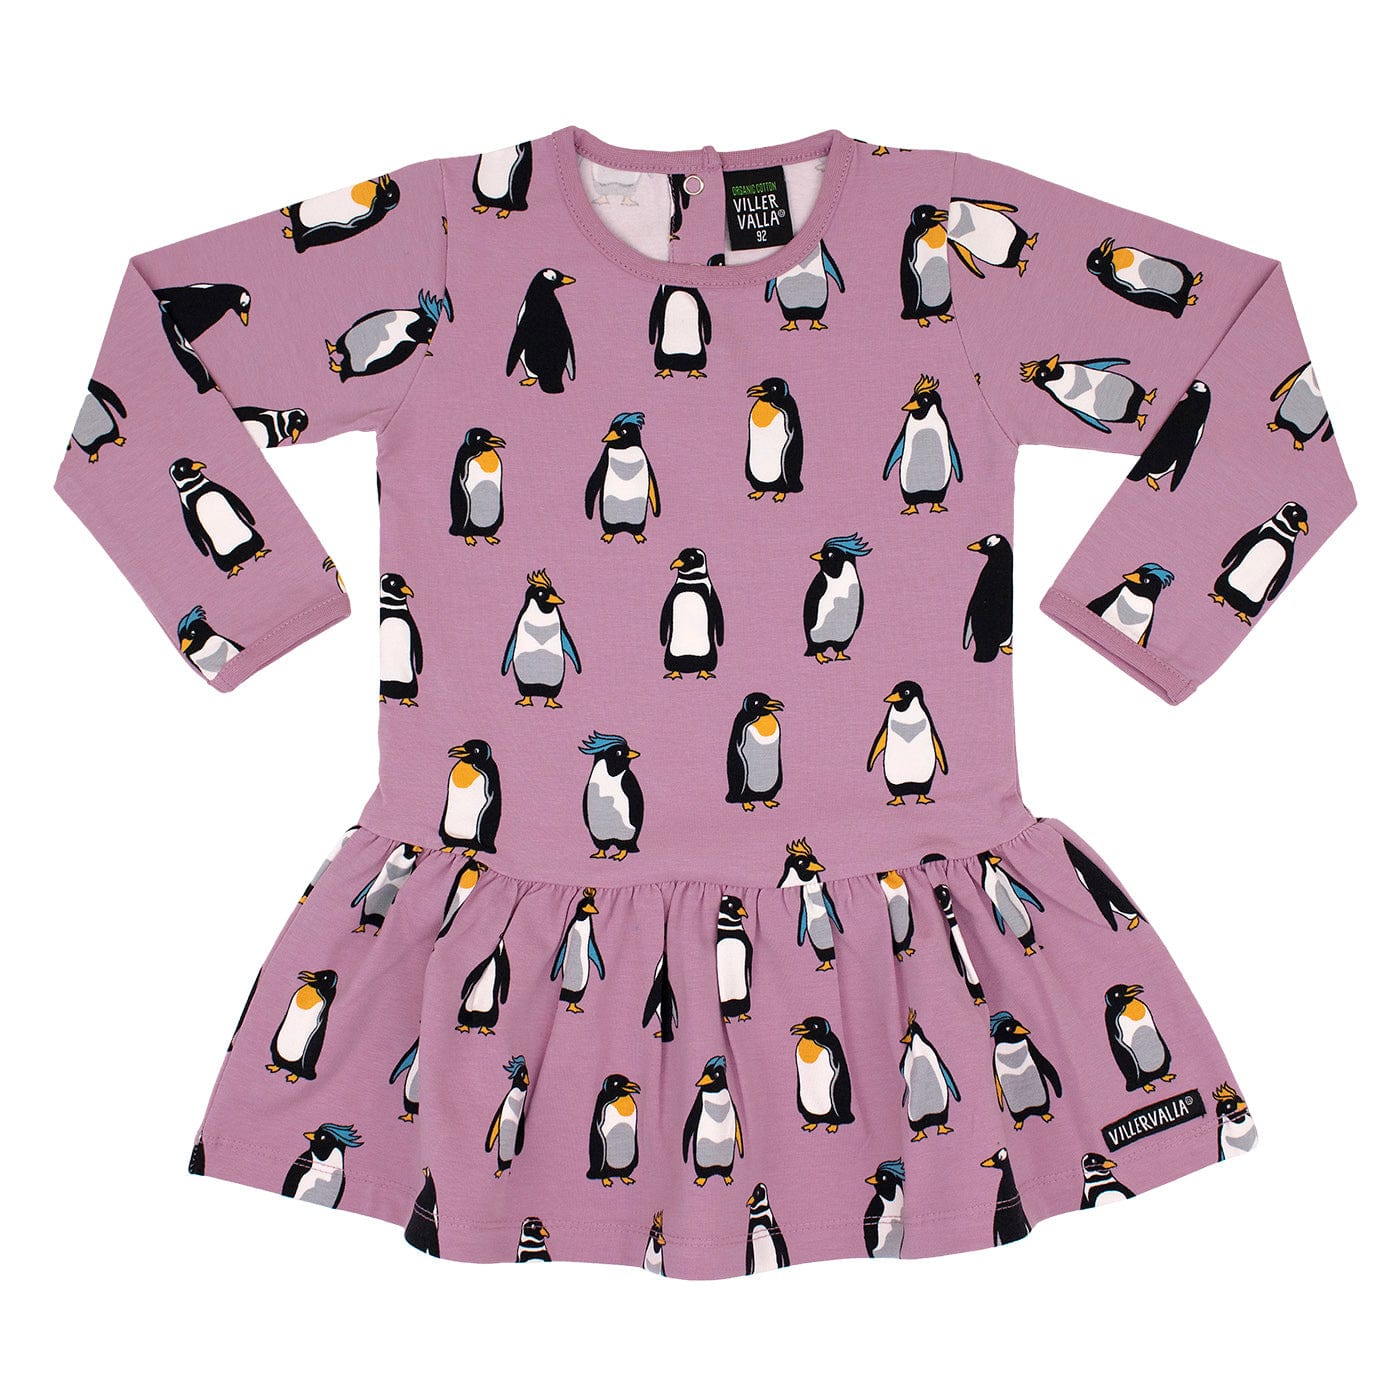 Penguin Dress With Dropped Skirt Smoothie